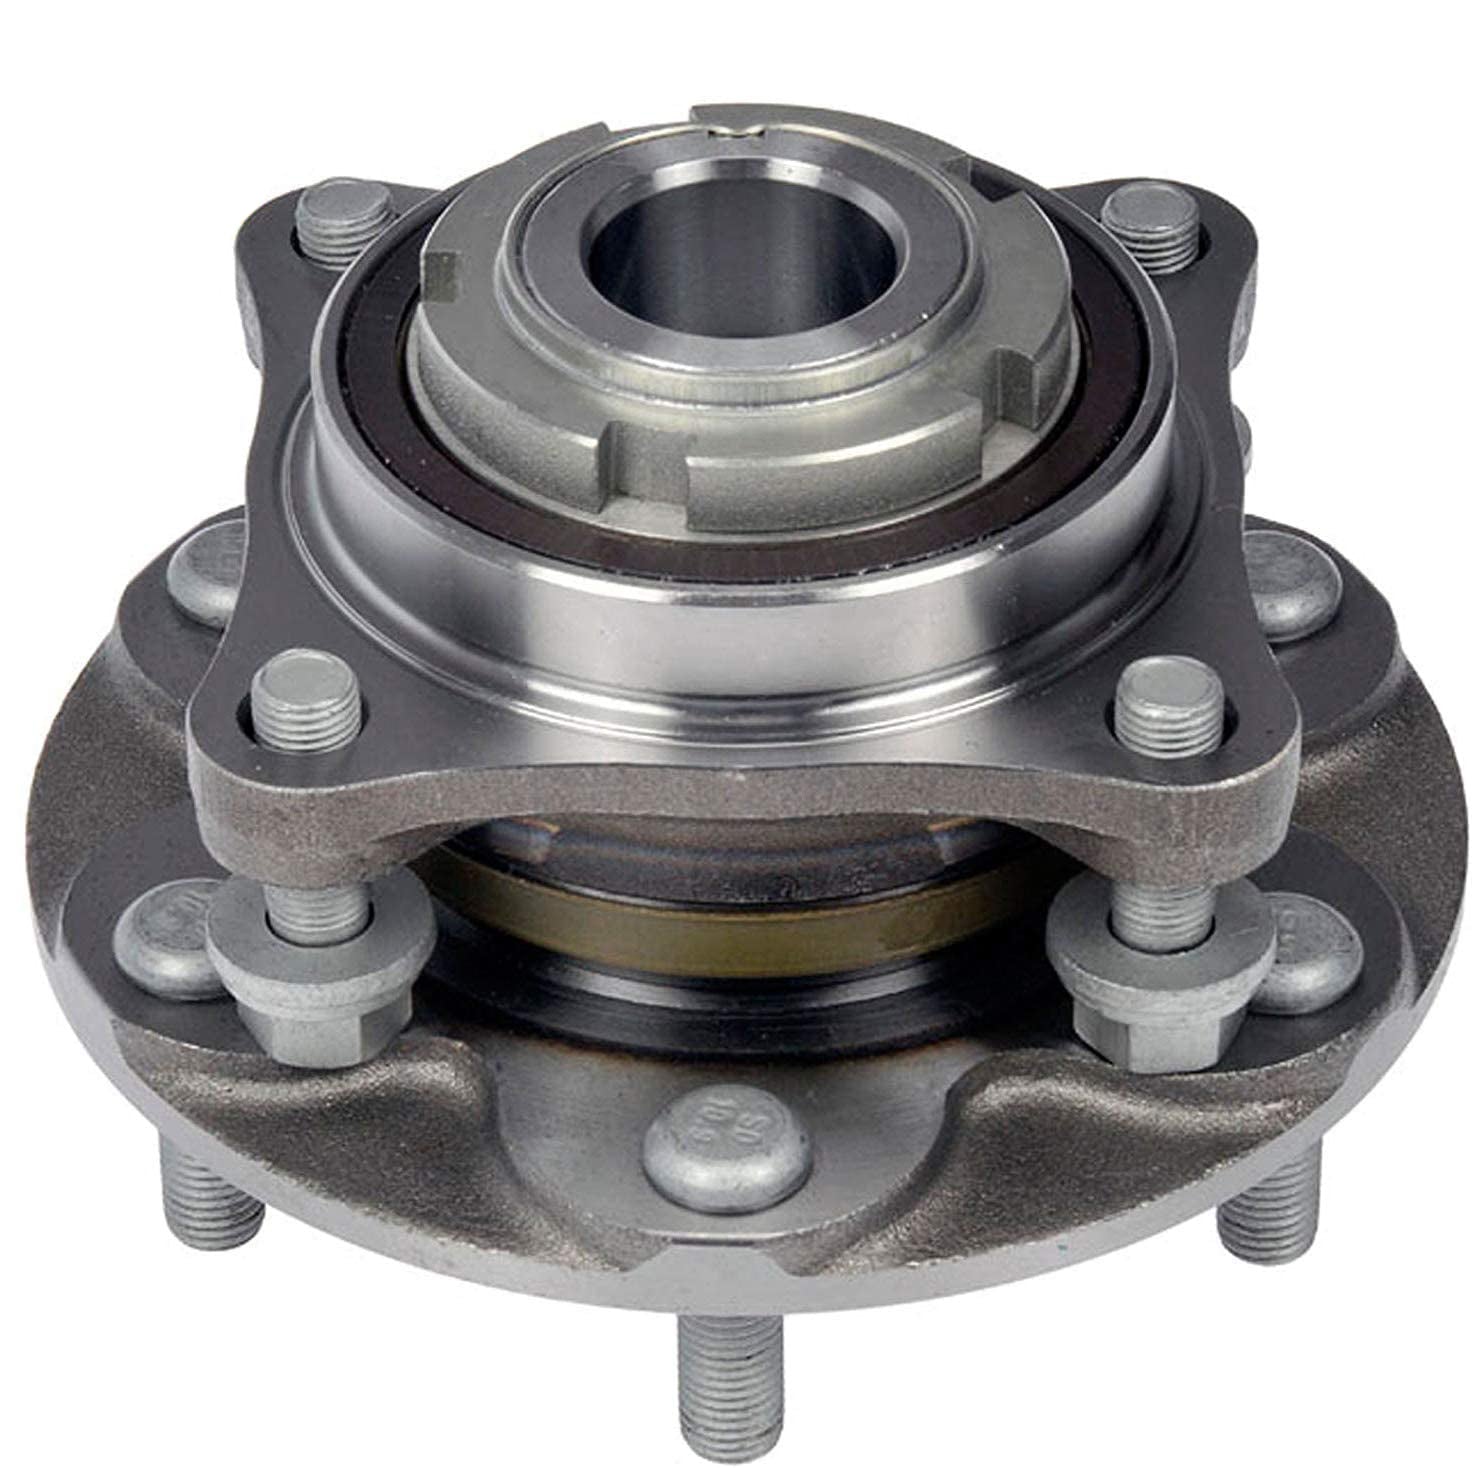 JADODE 950-004 2WD FRONT Wheel Bearing Hub Assembly for Toyota 4Runner Tacoma FJ Cruiser Hilux